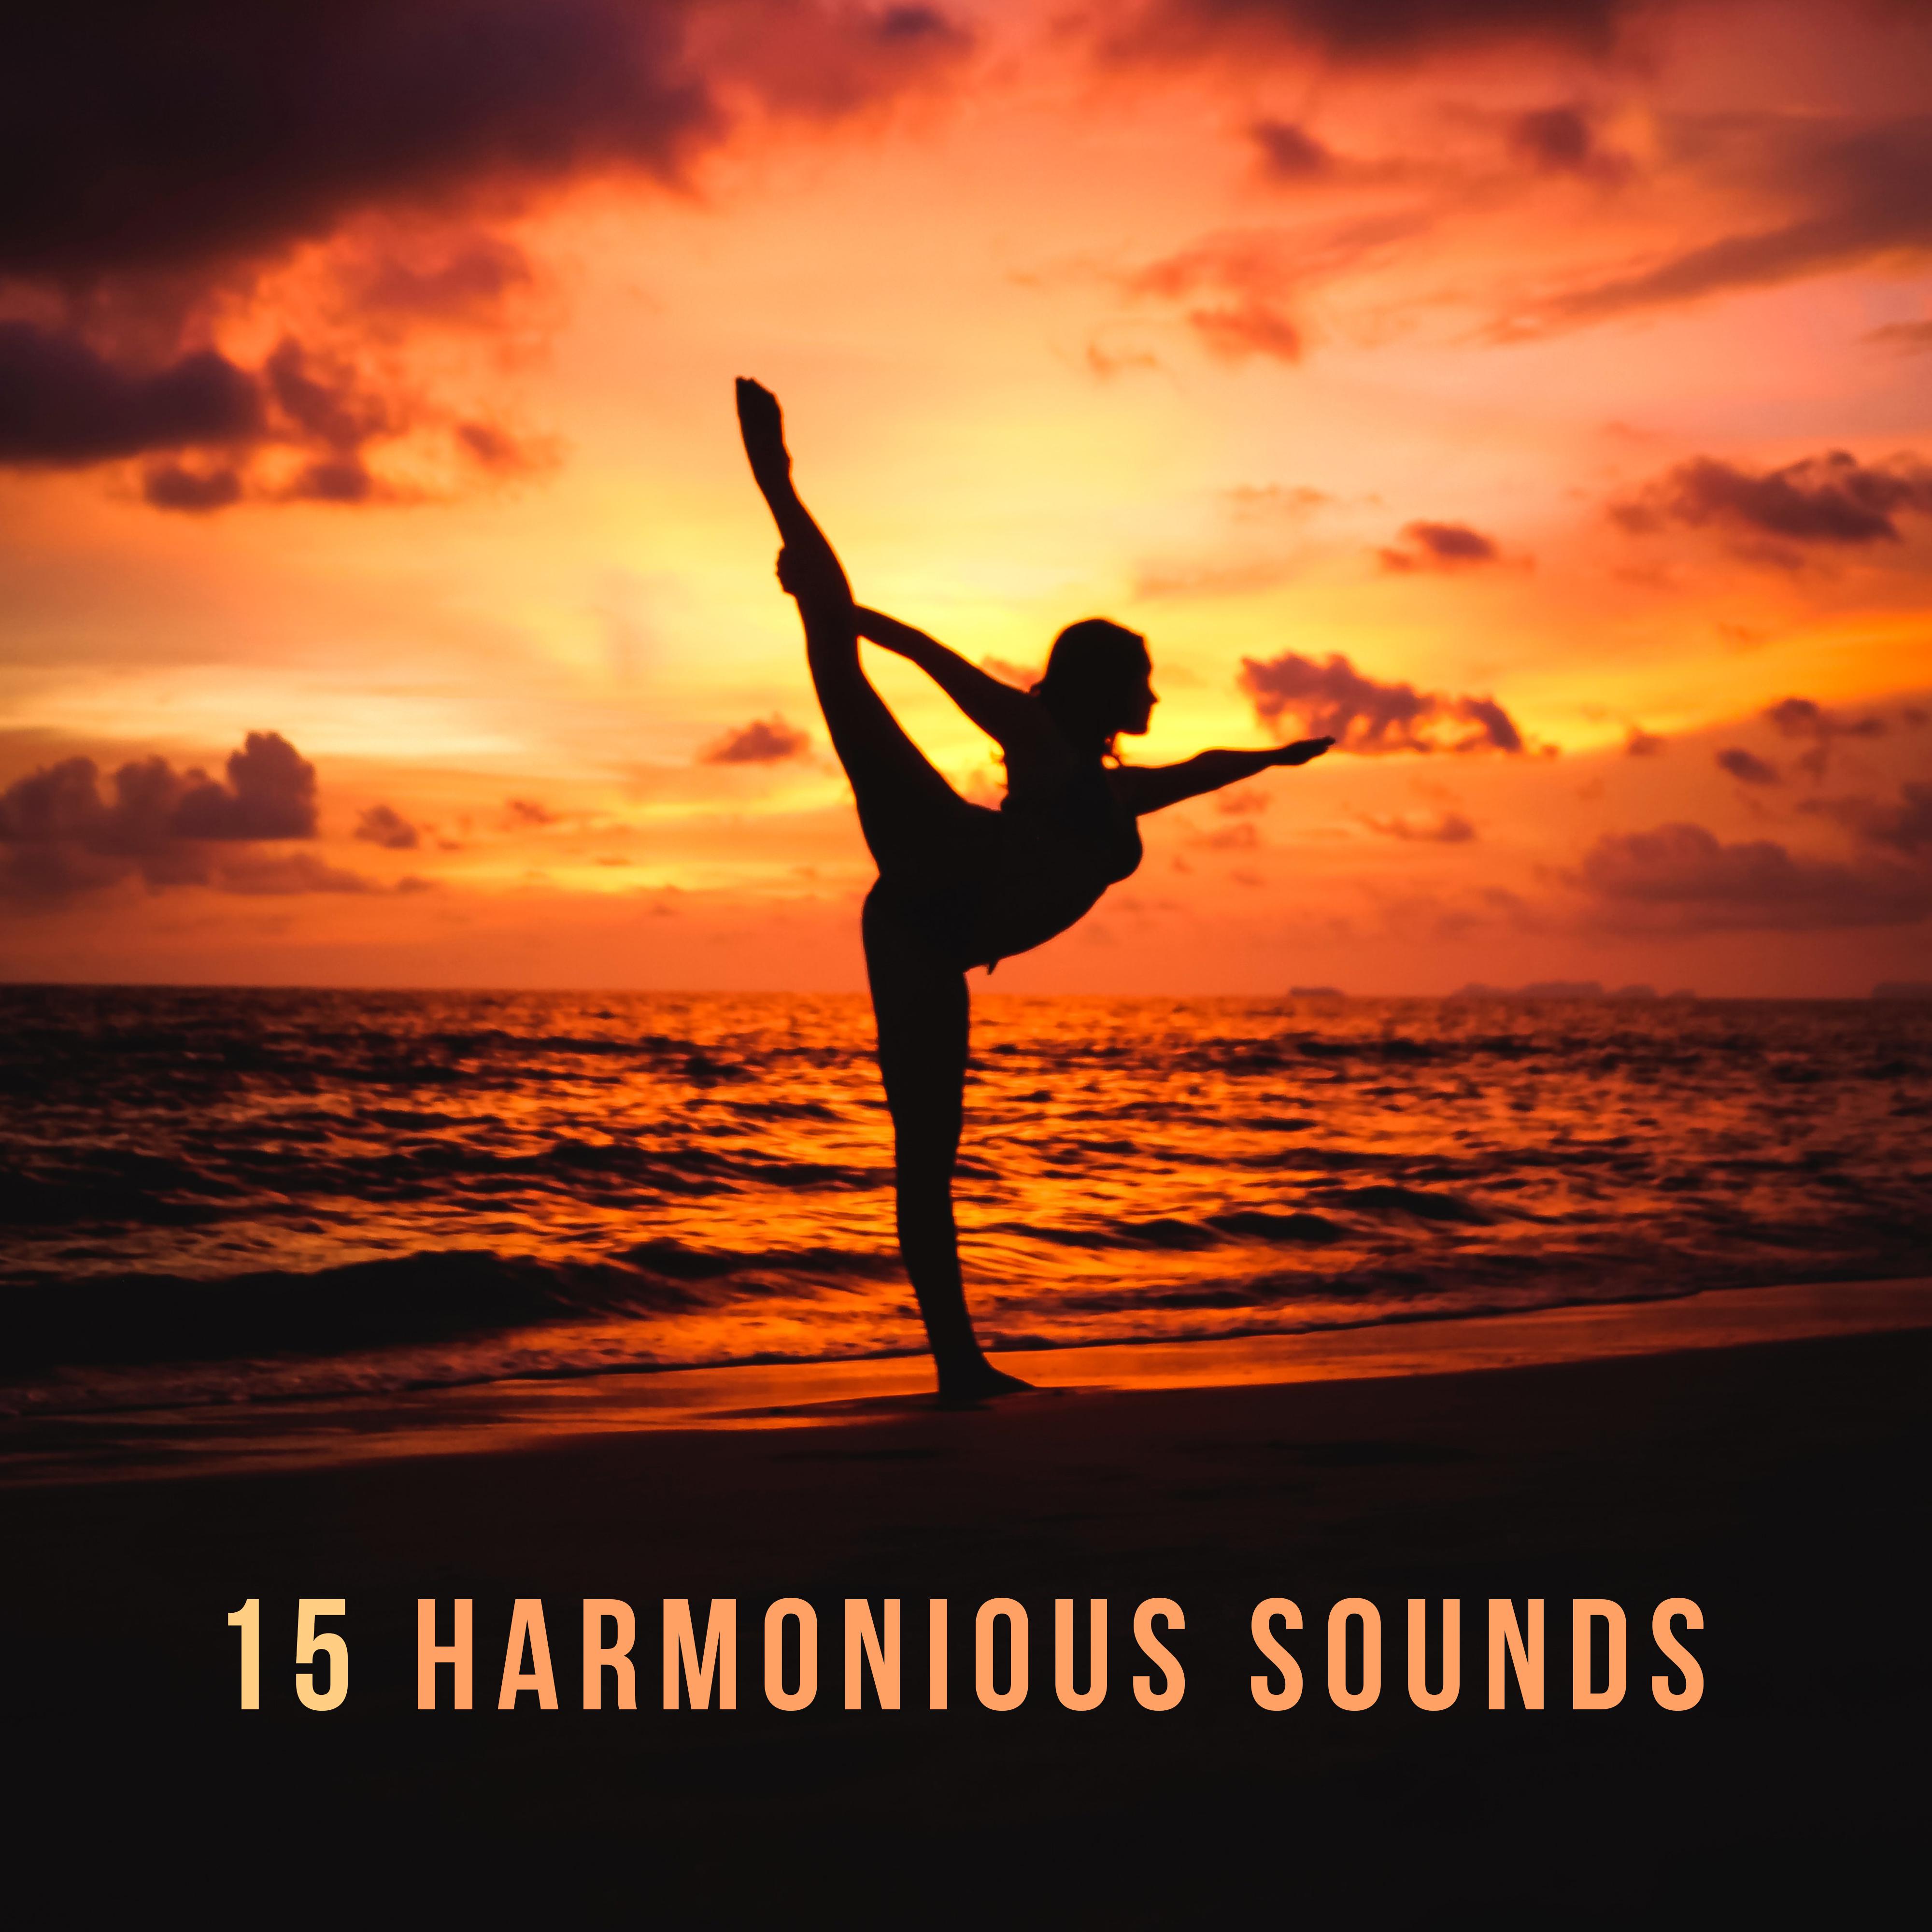 15 Harmonious Sounds  Yoga Music for Relaxation, Deep Meditation, Bedtime Mindfulness, New Age Songs for Yoga, Relax Zone, Lounge, Meditation Music Zone, Meditation Awareness